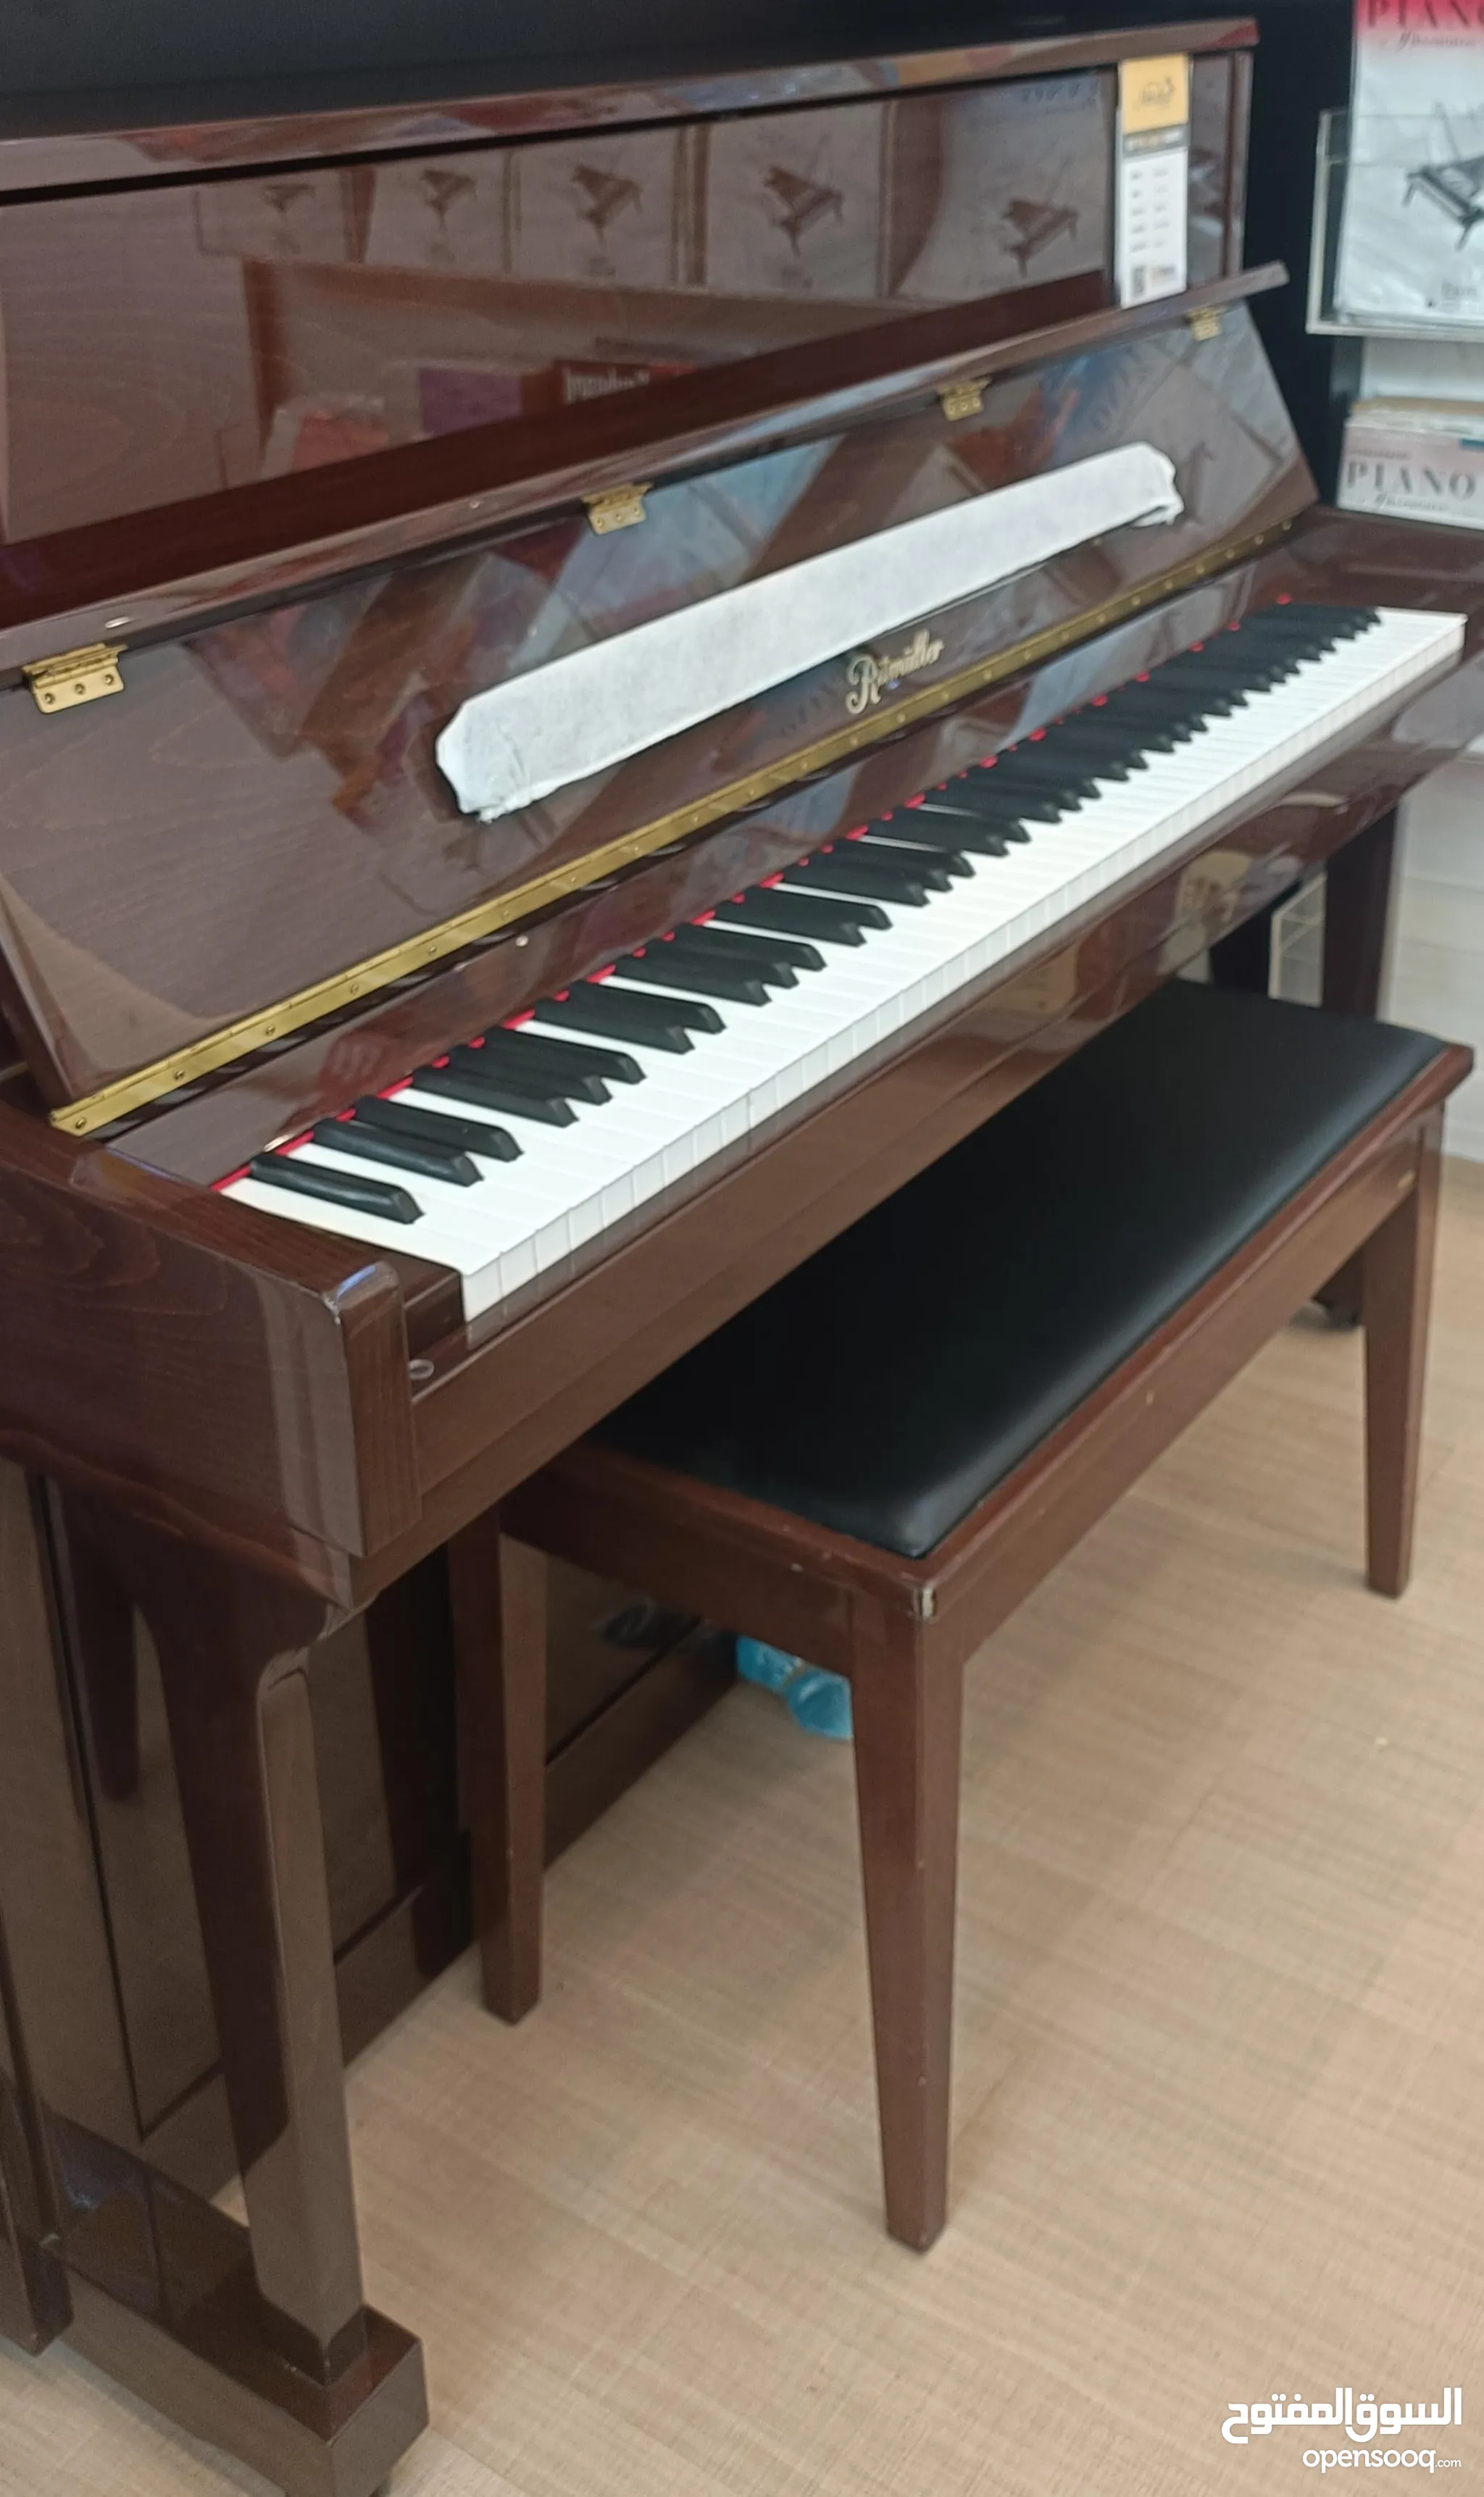 Piano & Keyboards for Sale in Dubai : Cheap & Best Prices | OpenSooq